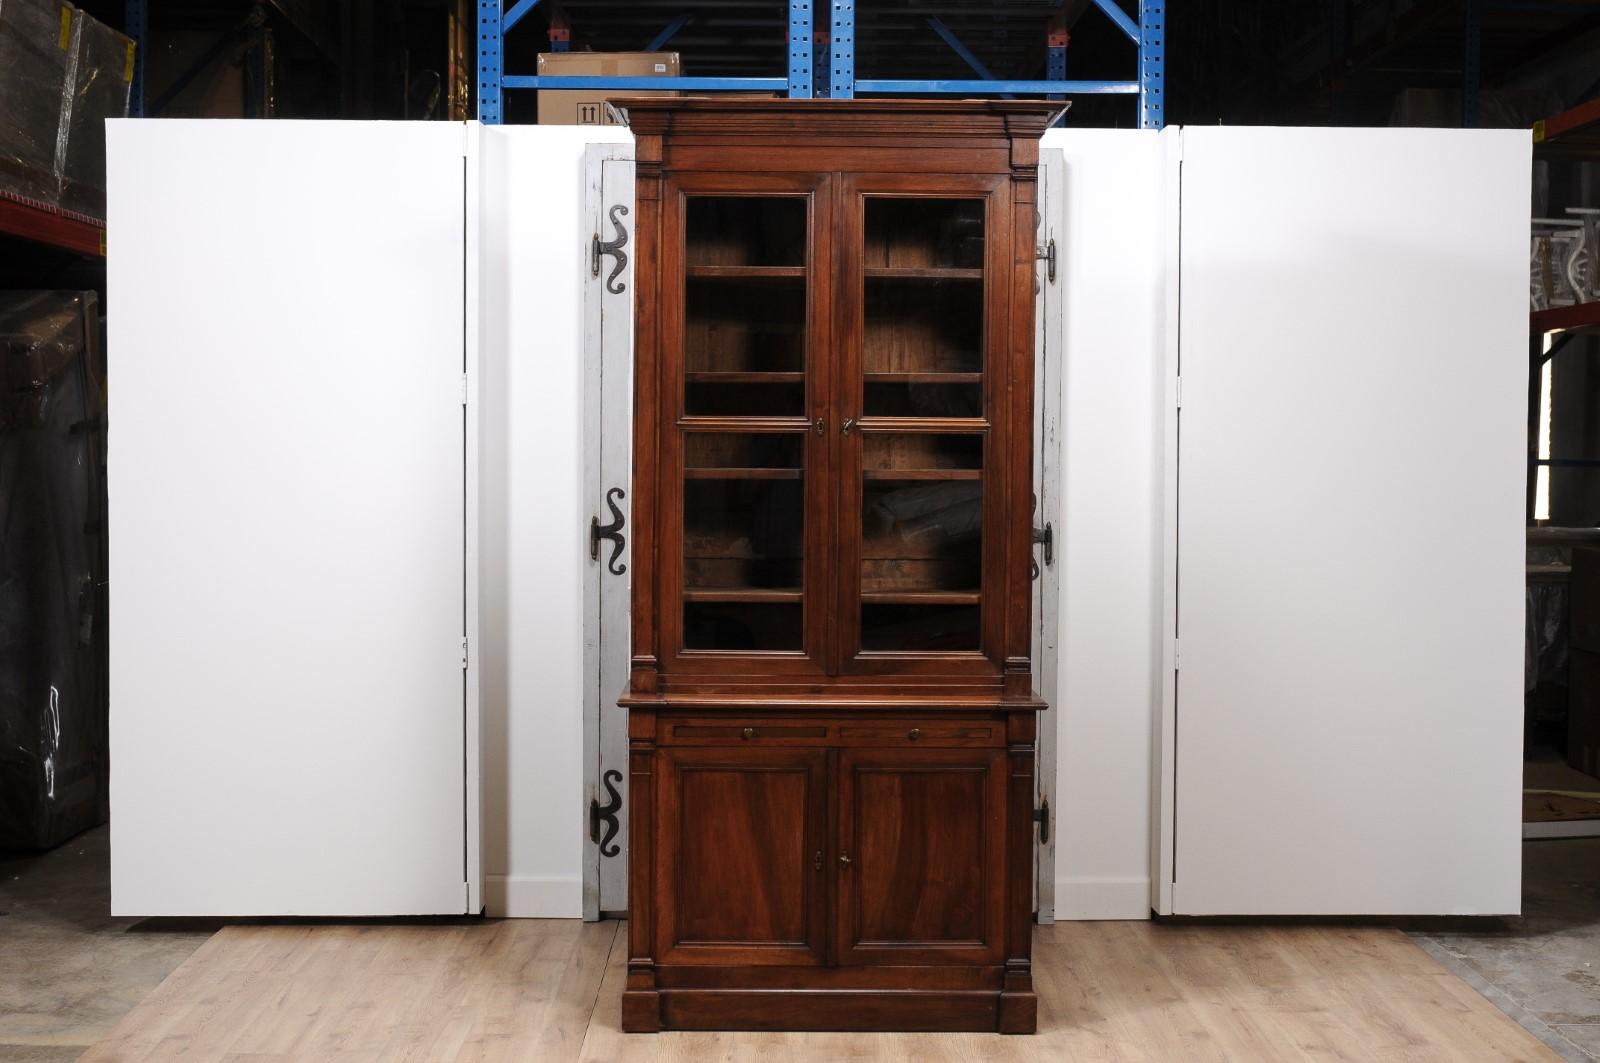 Louis XVI Style 1890s French Bookcase with Glass Doors and Pull Out Drawers For Sale 2